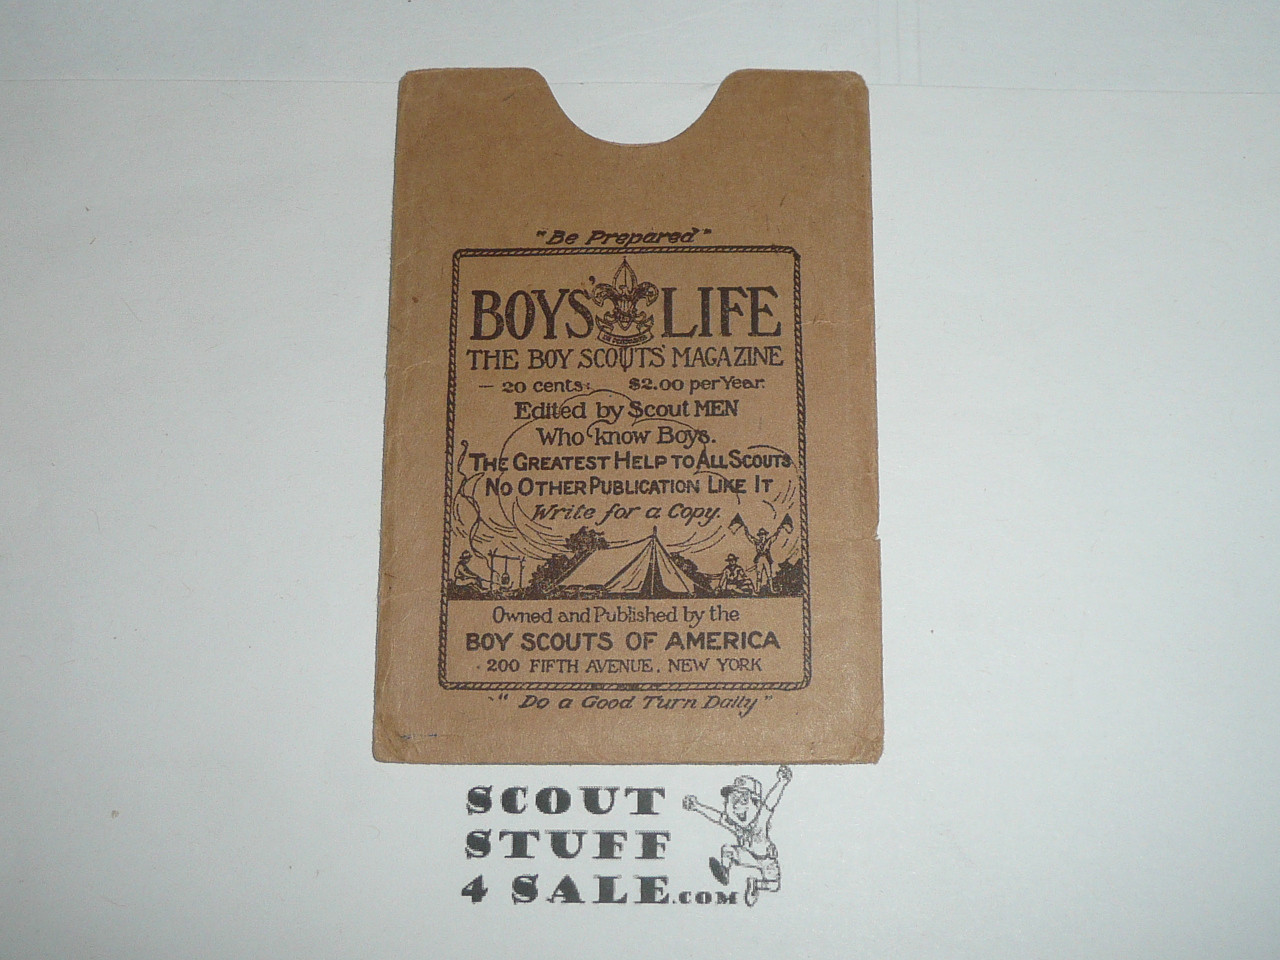 1921 Boy Scout Adult Membership Card, 3-fold, with the Envelope, 5 signatures, expires September 1921, BSMC198